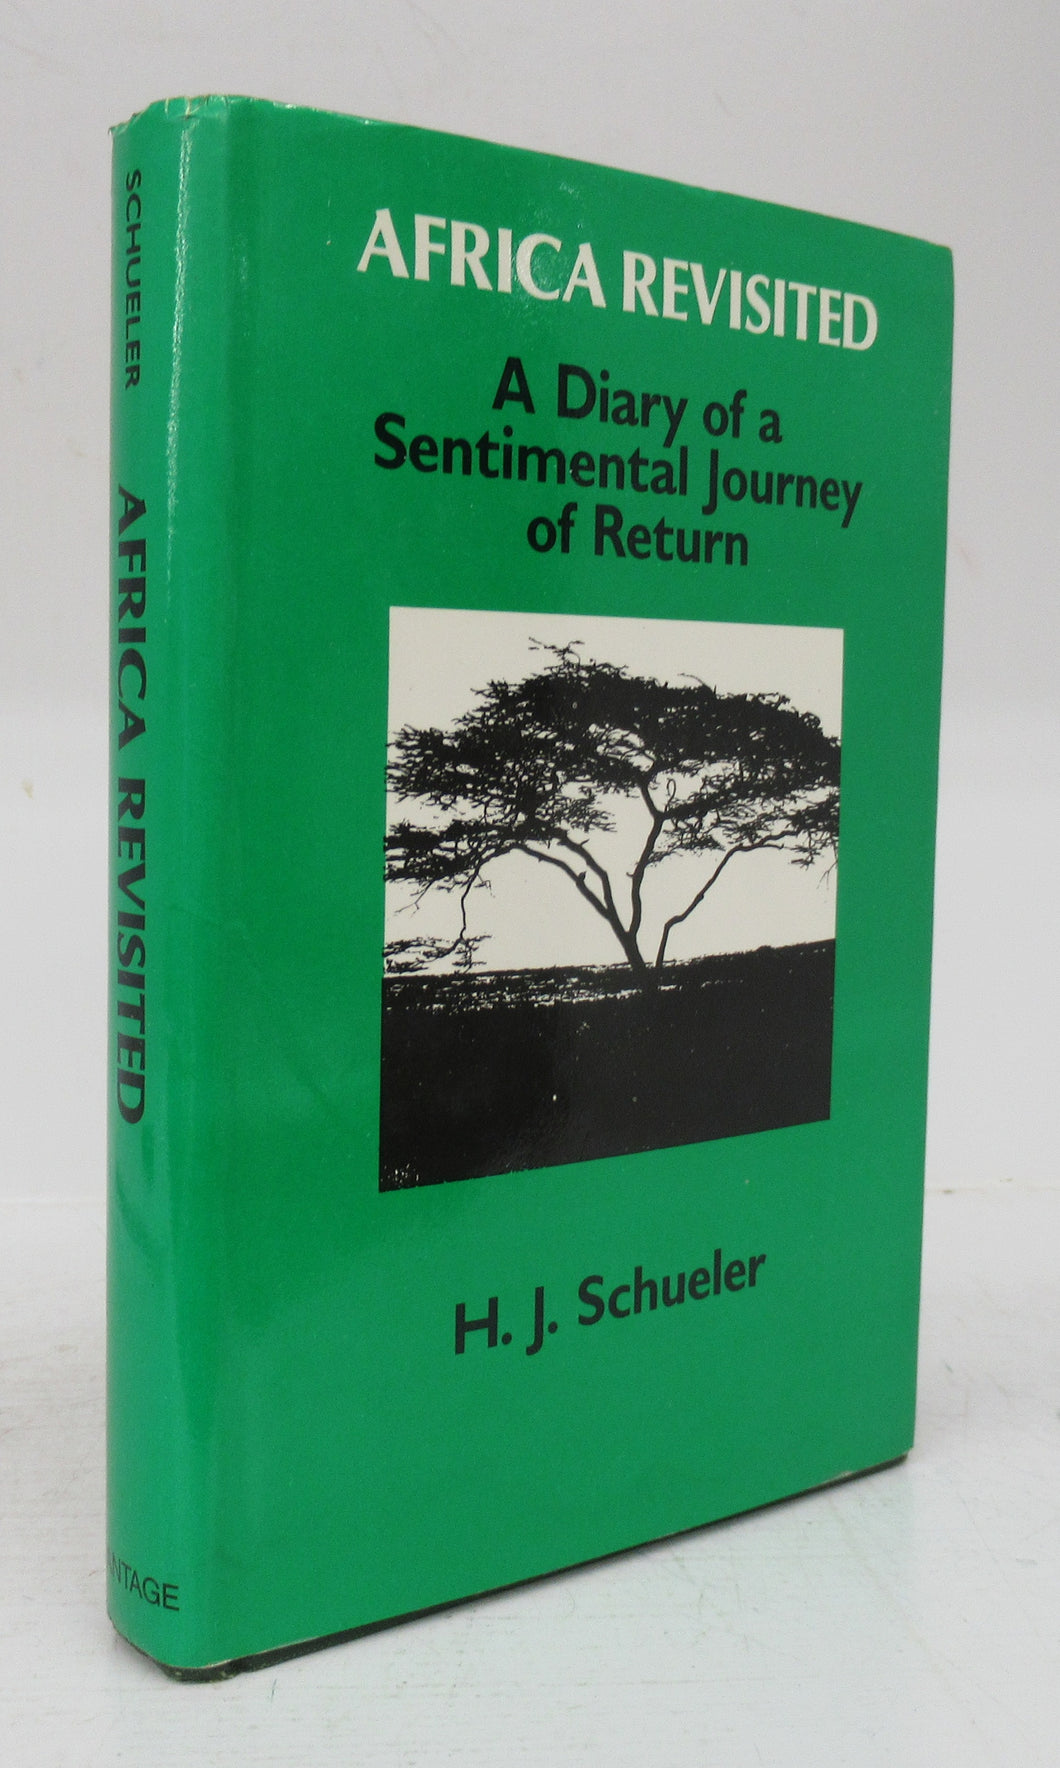 Africa Revisited: A Diary of a Sentimental Journey of Return